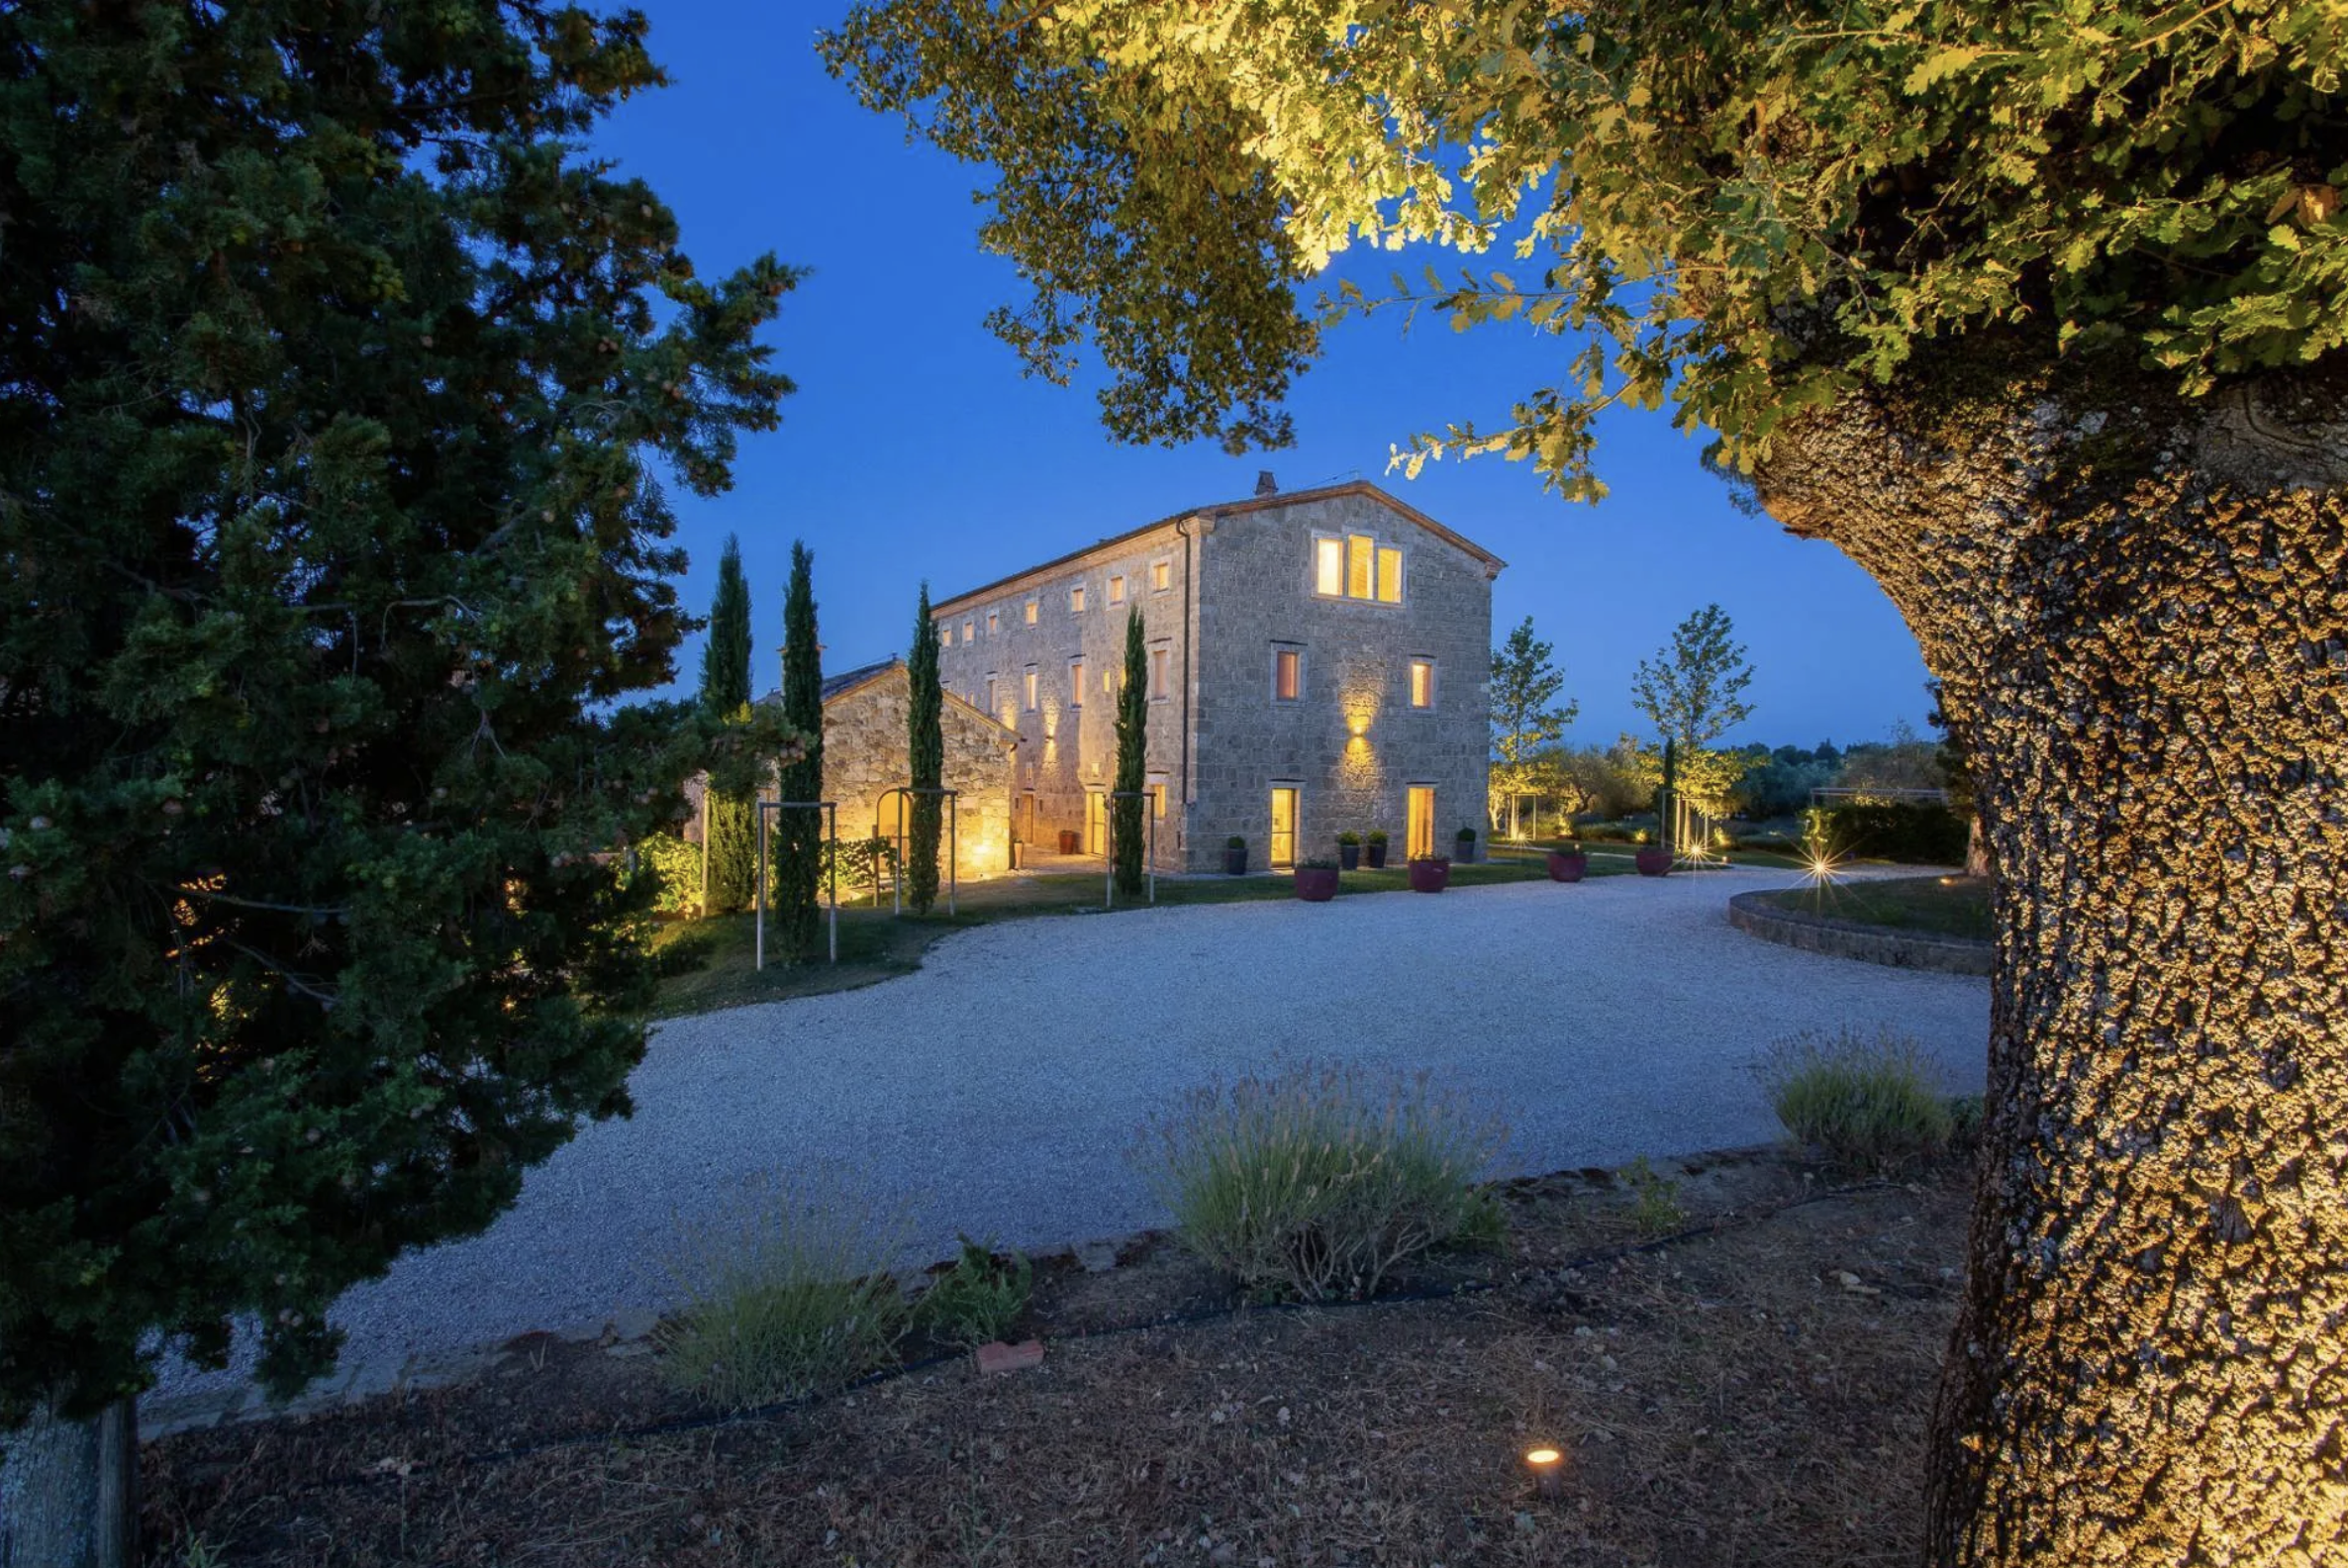 Francis York Villa Travertino: Luxury Villa and Wine Estate in the Heart of Tuscany 1.png